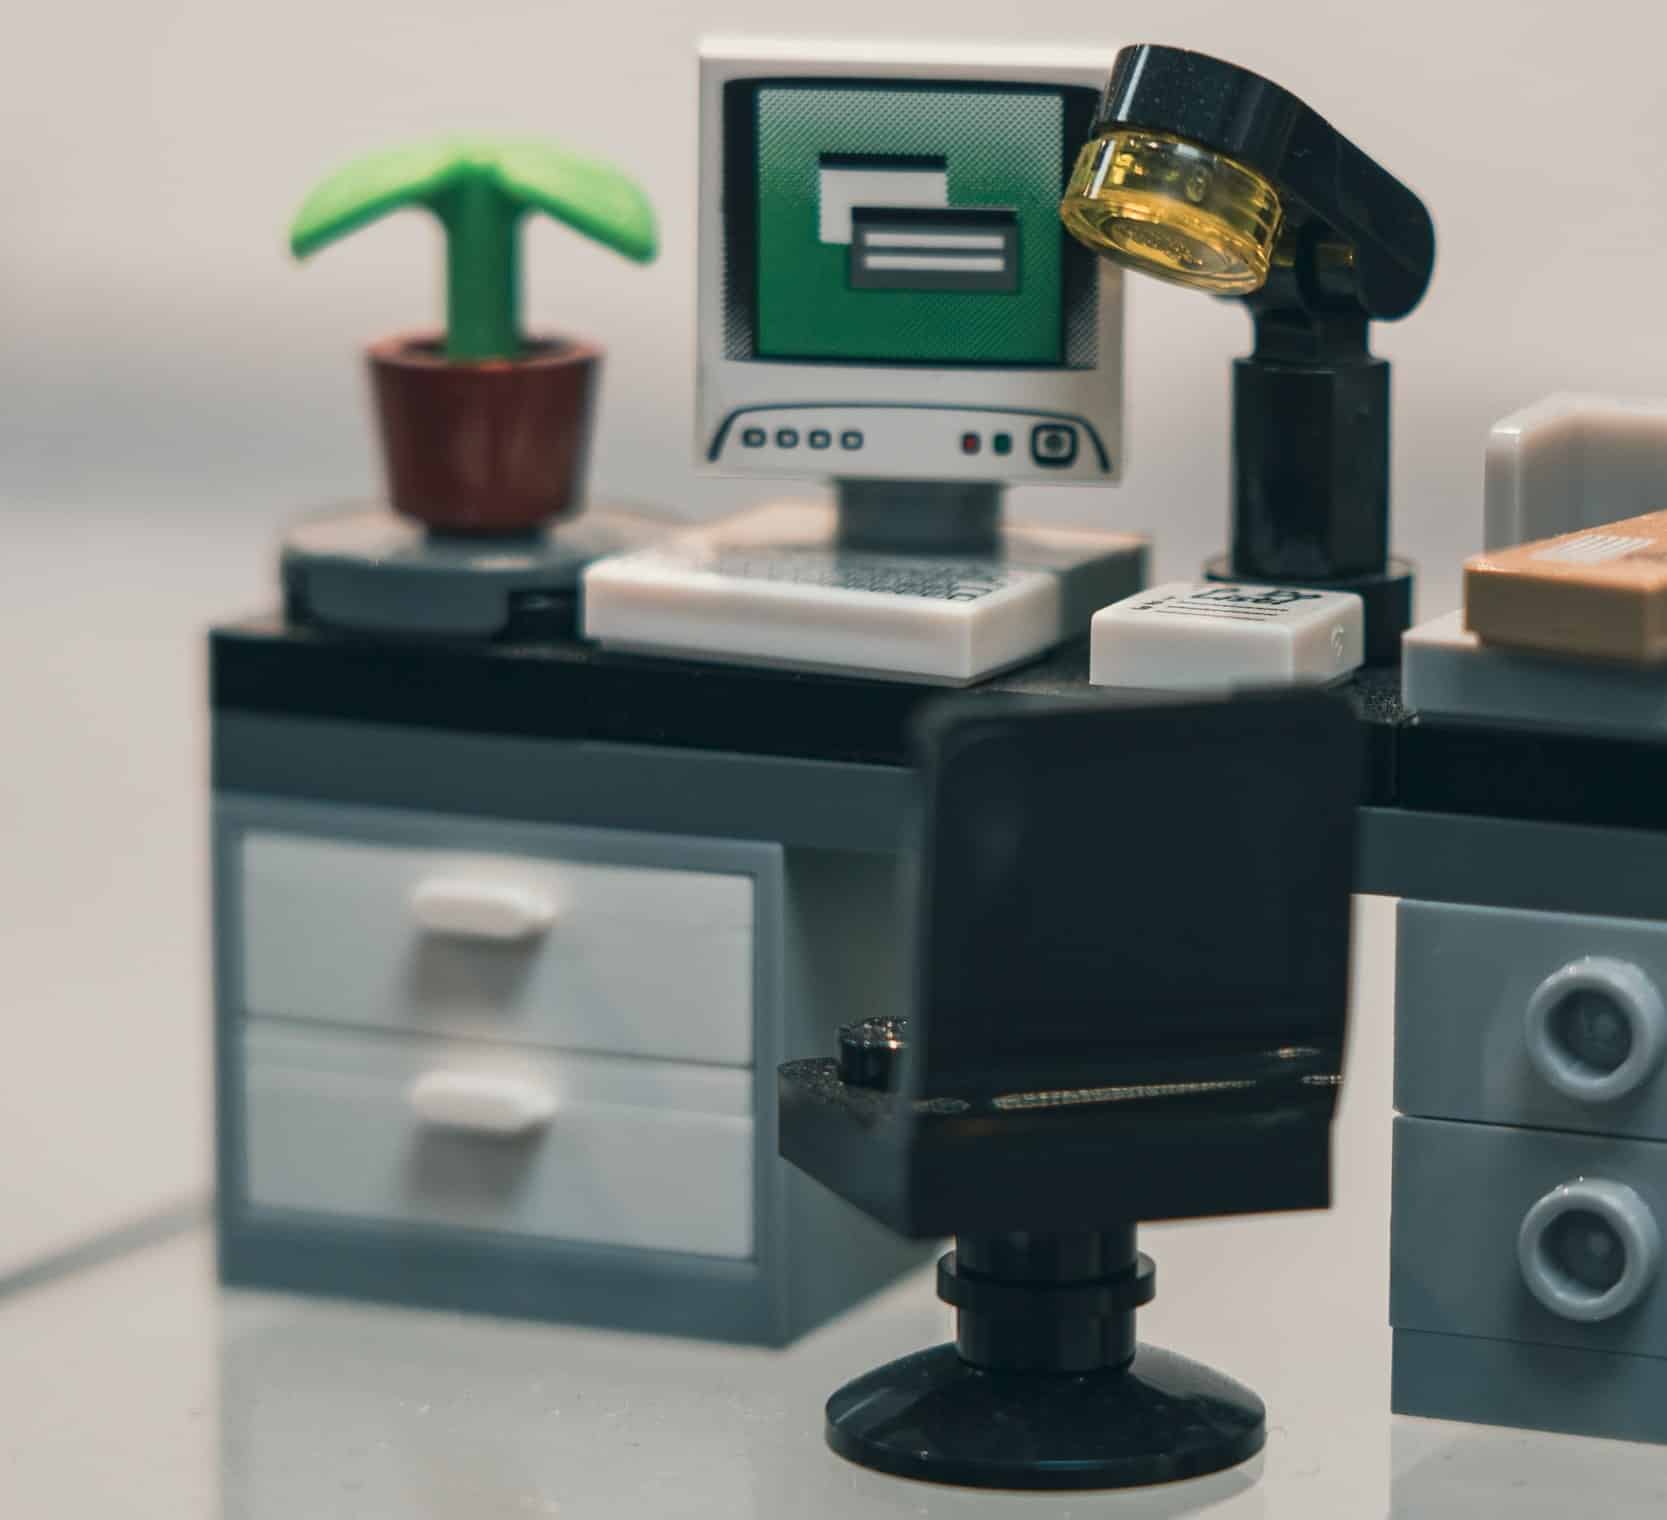 Lego desk and computer